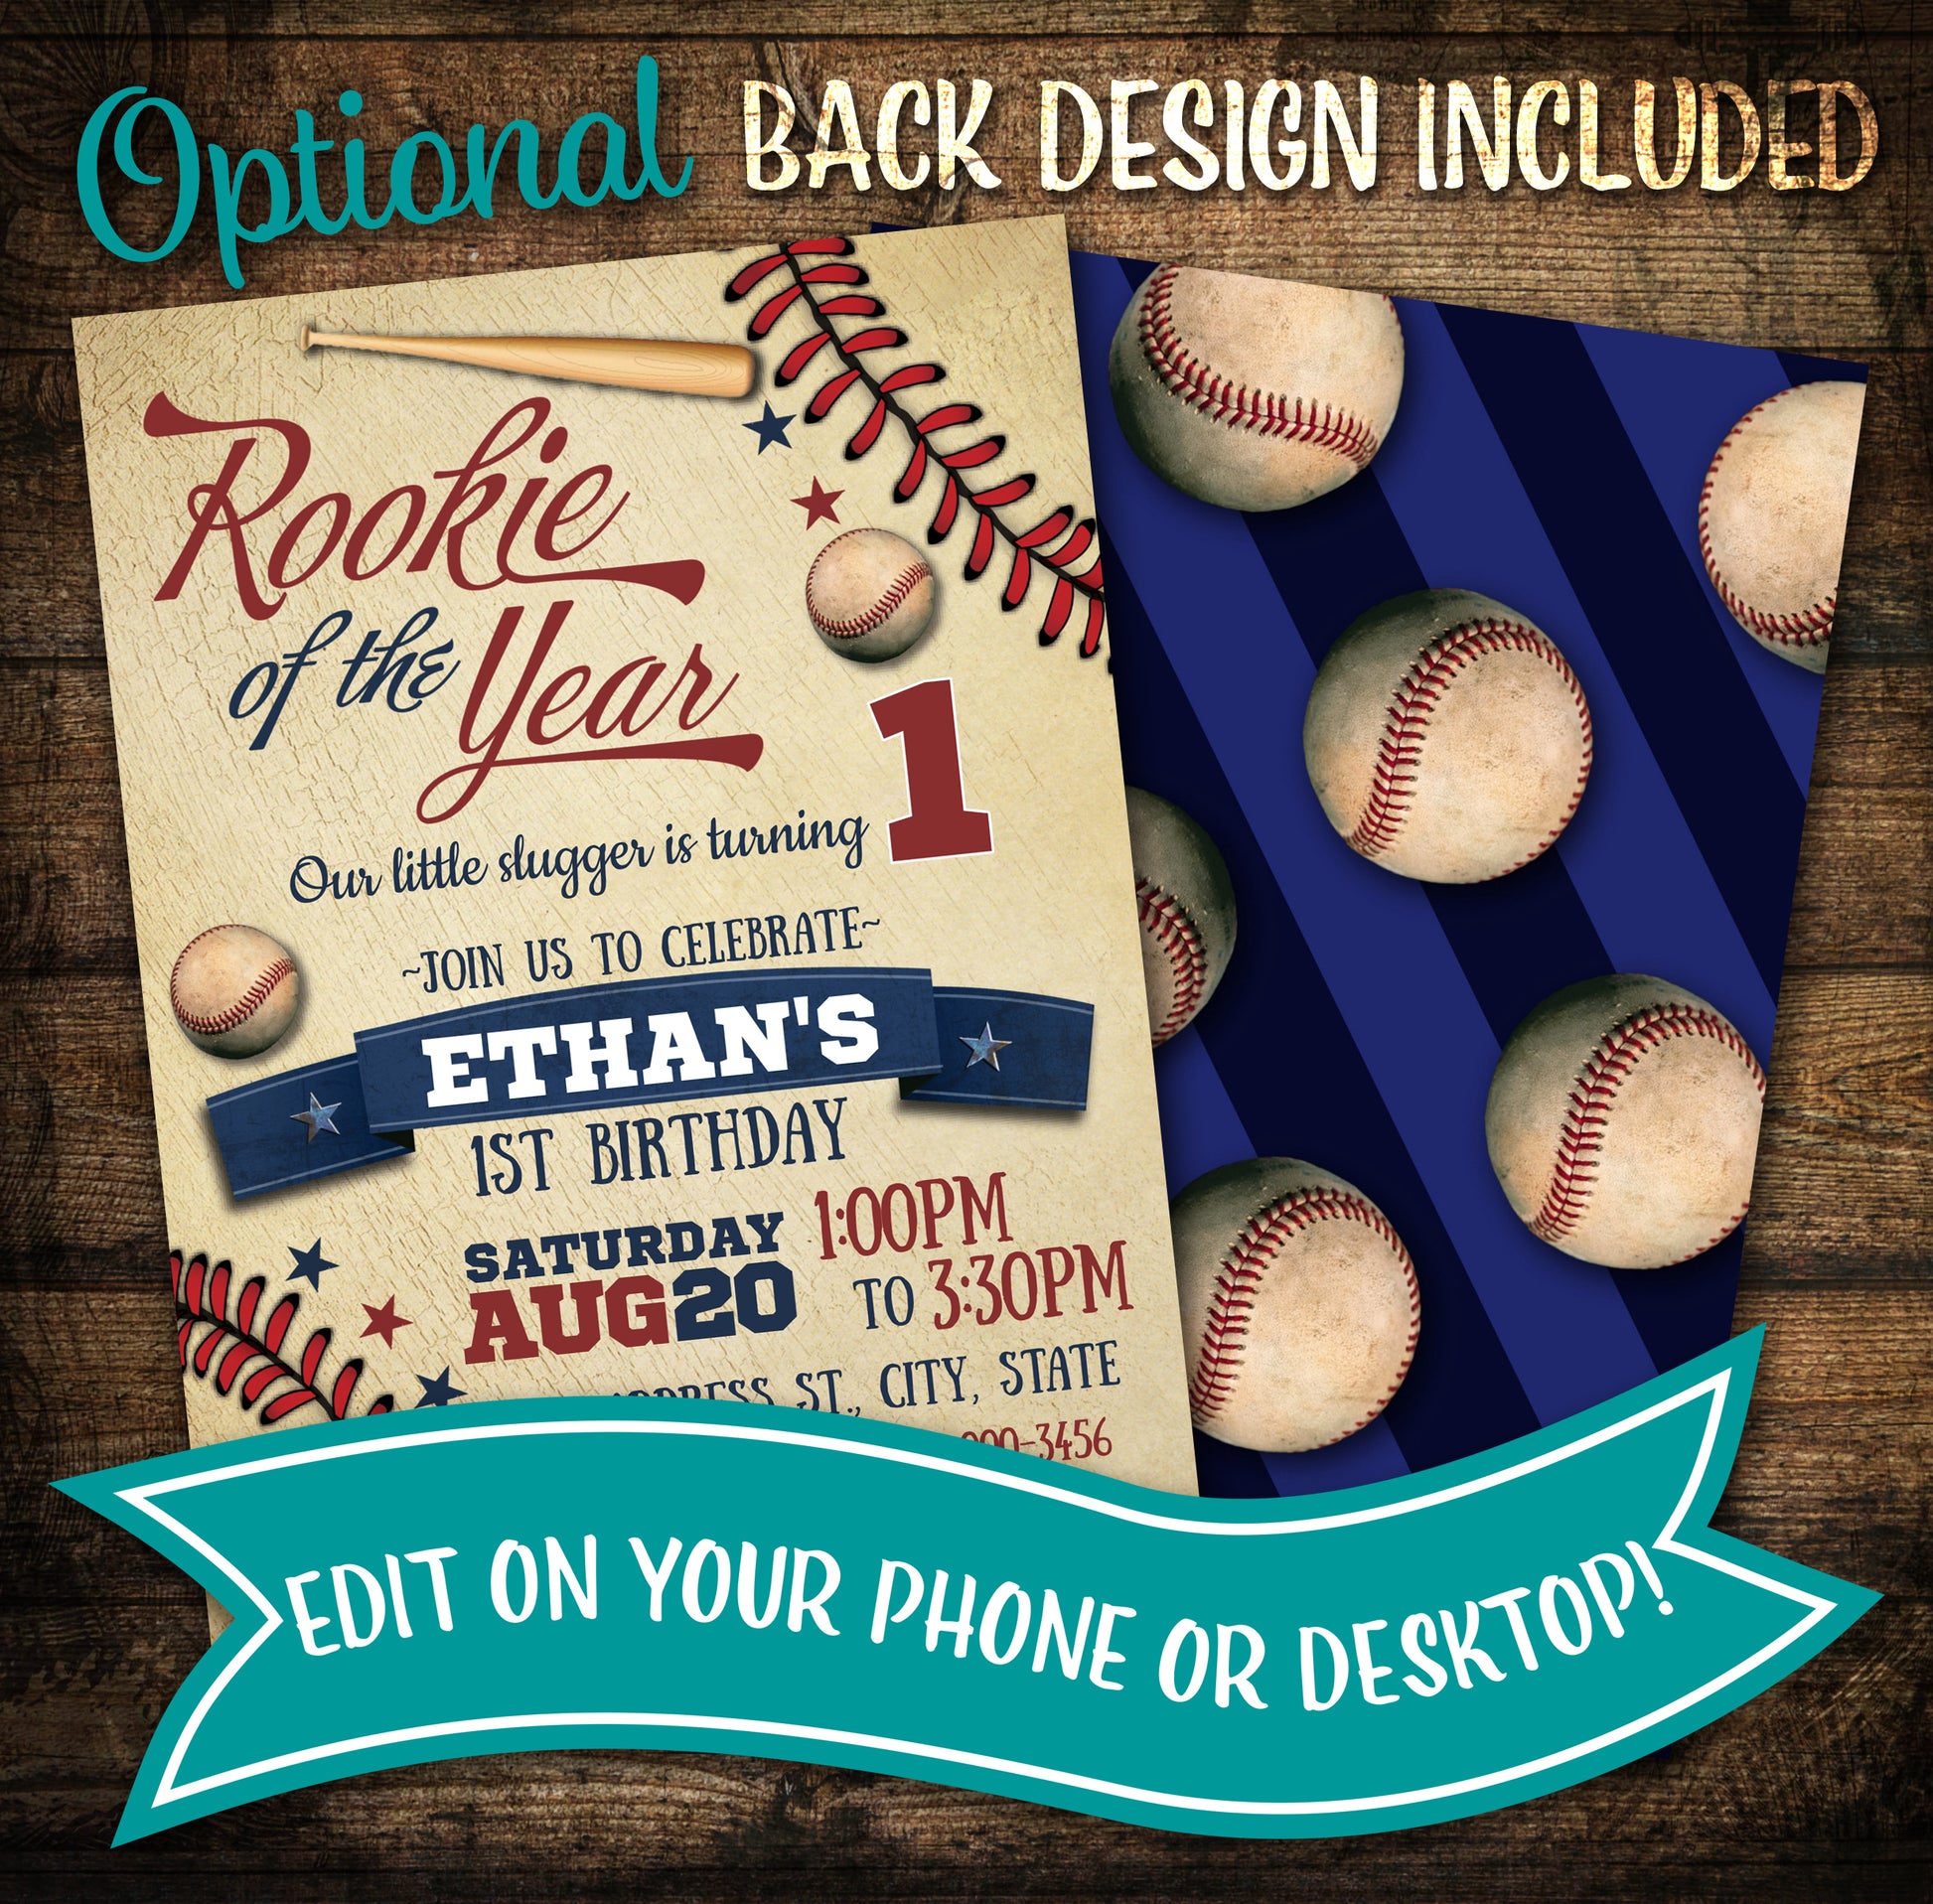 rookie of the year birthday invitation front and back design